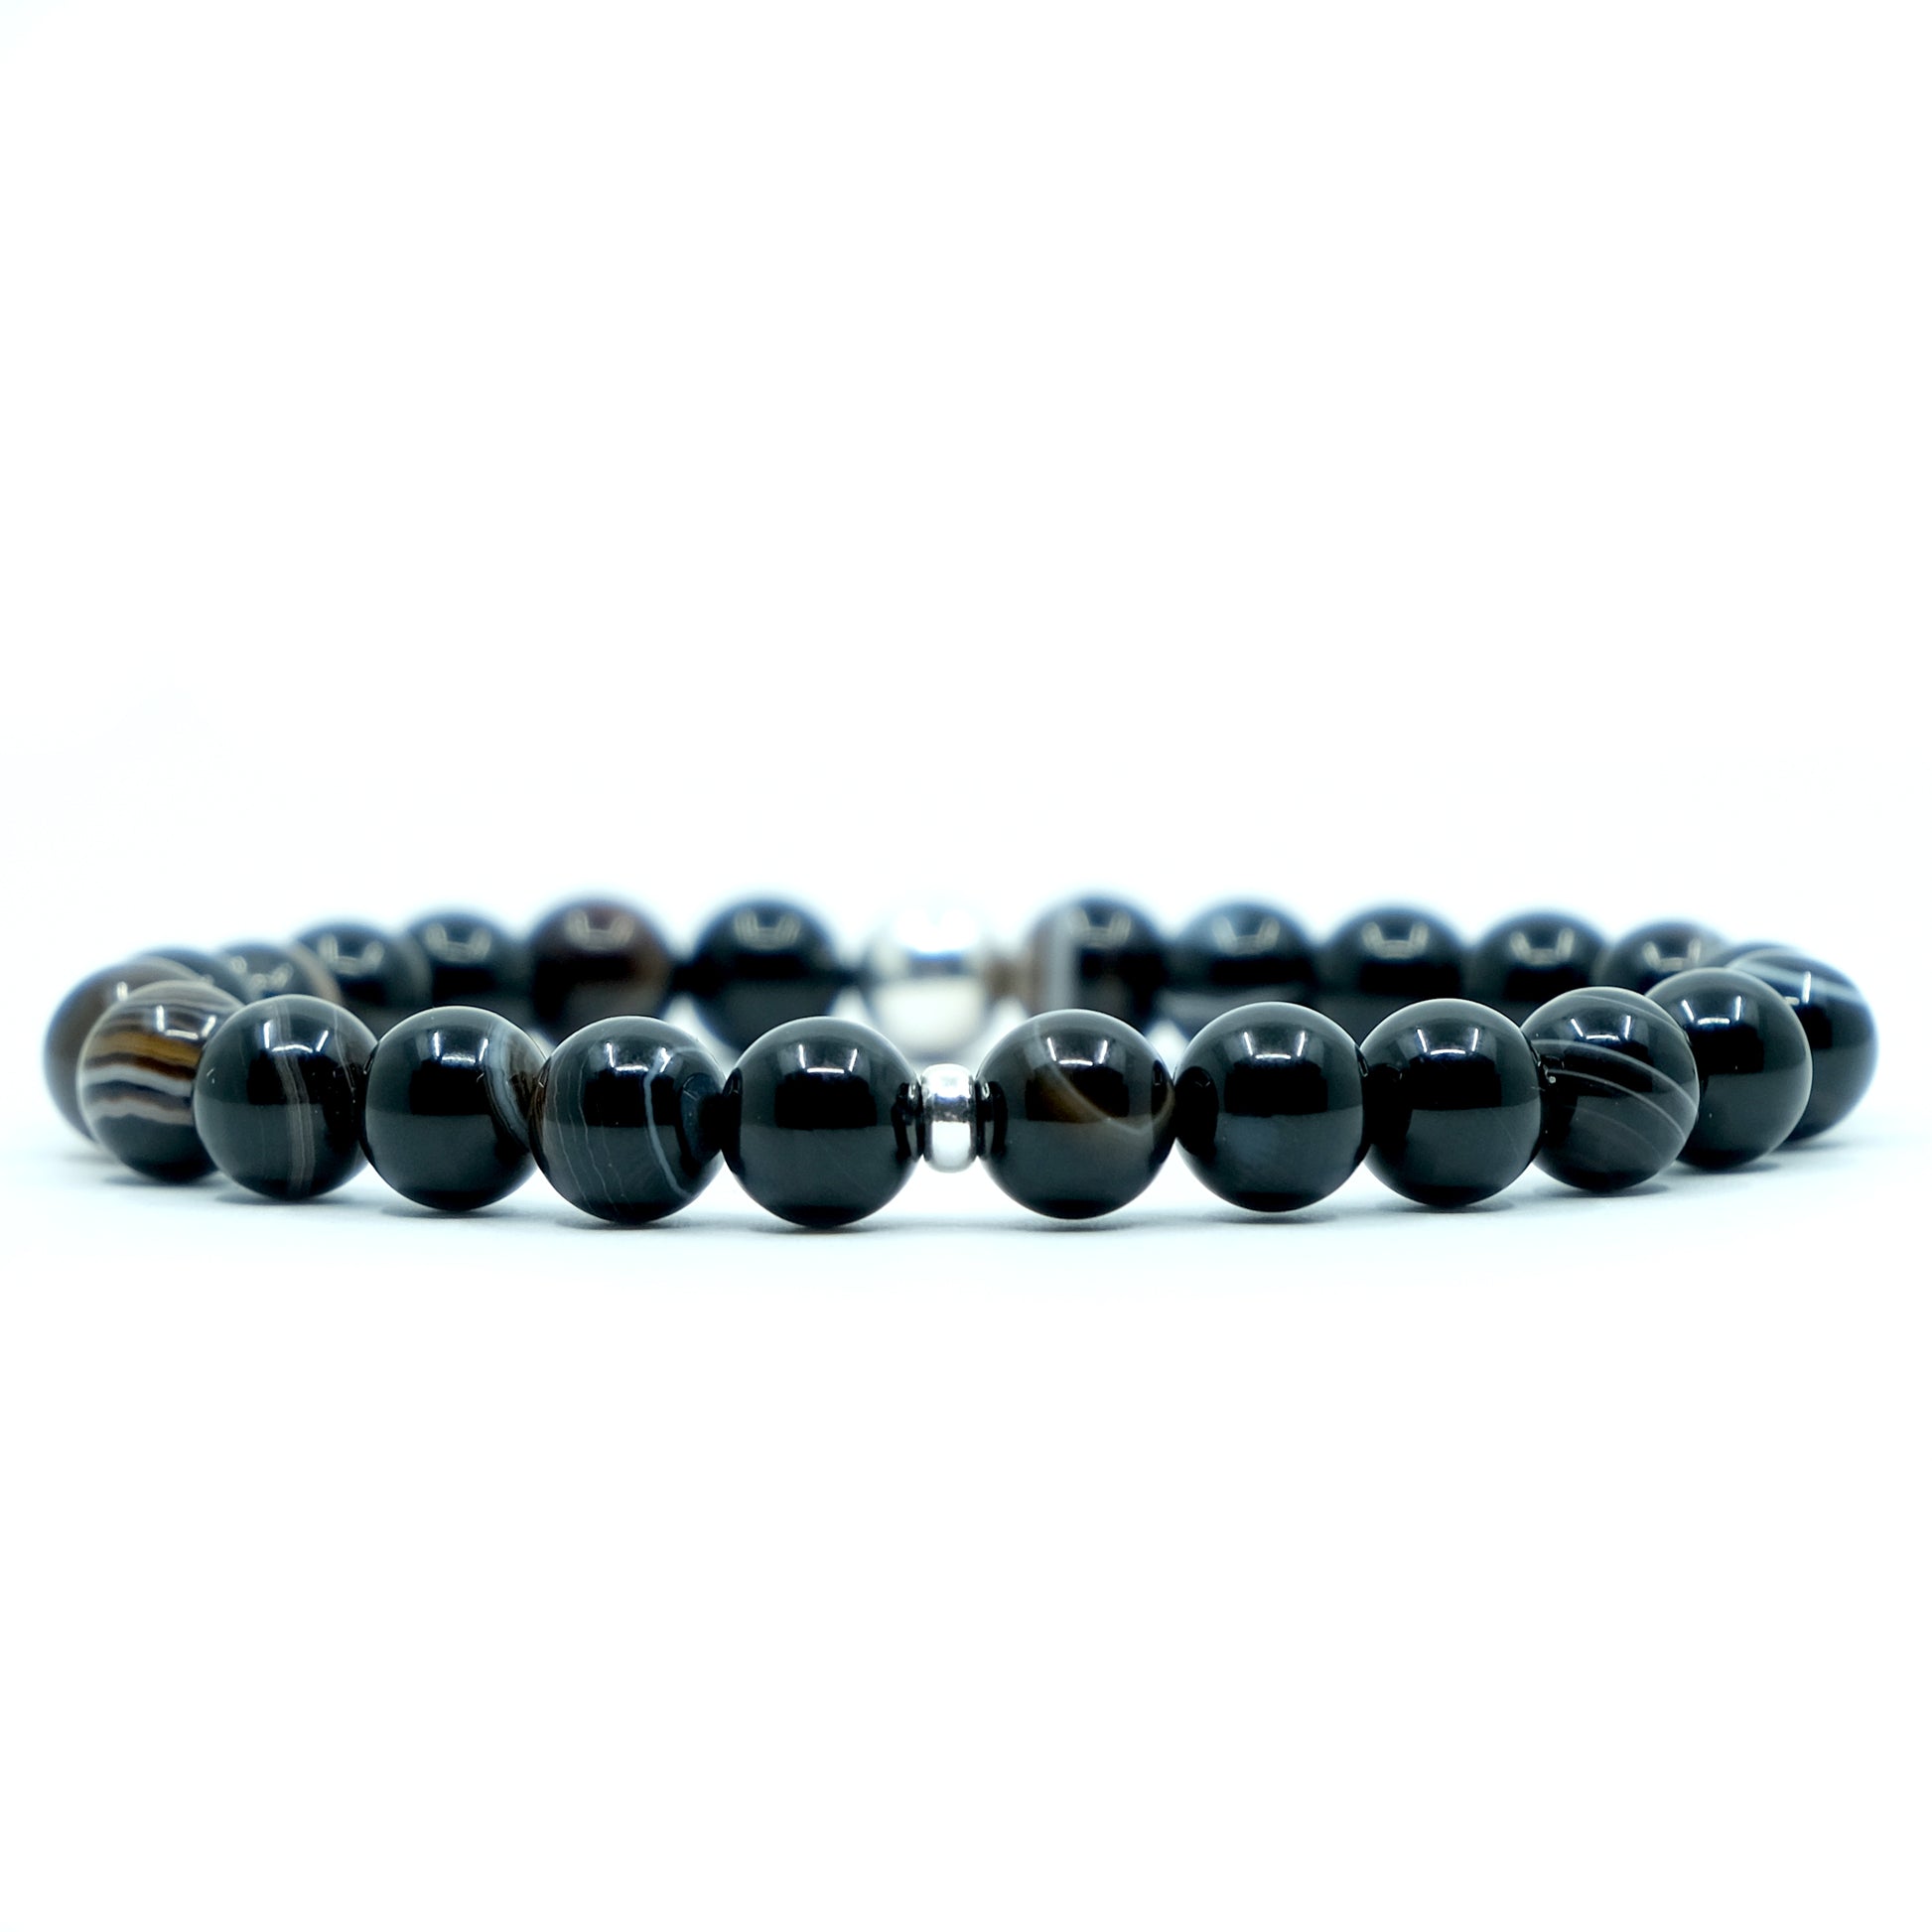 8mm black agate gemstone stretch bracelet with silver feature bead